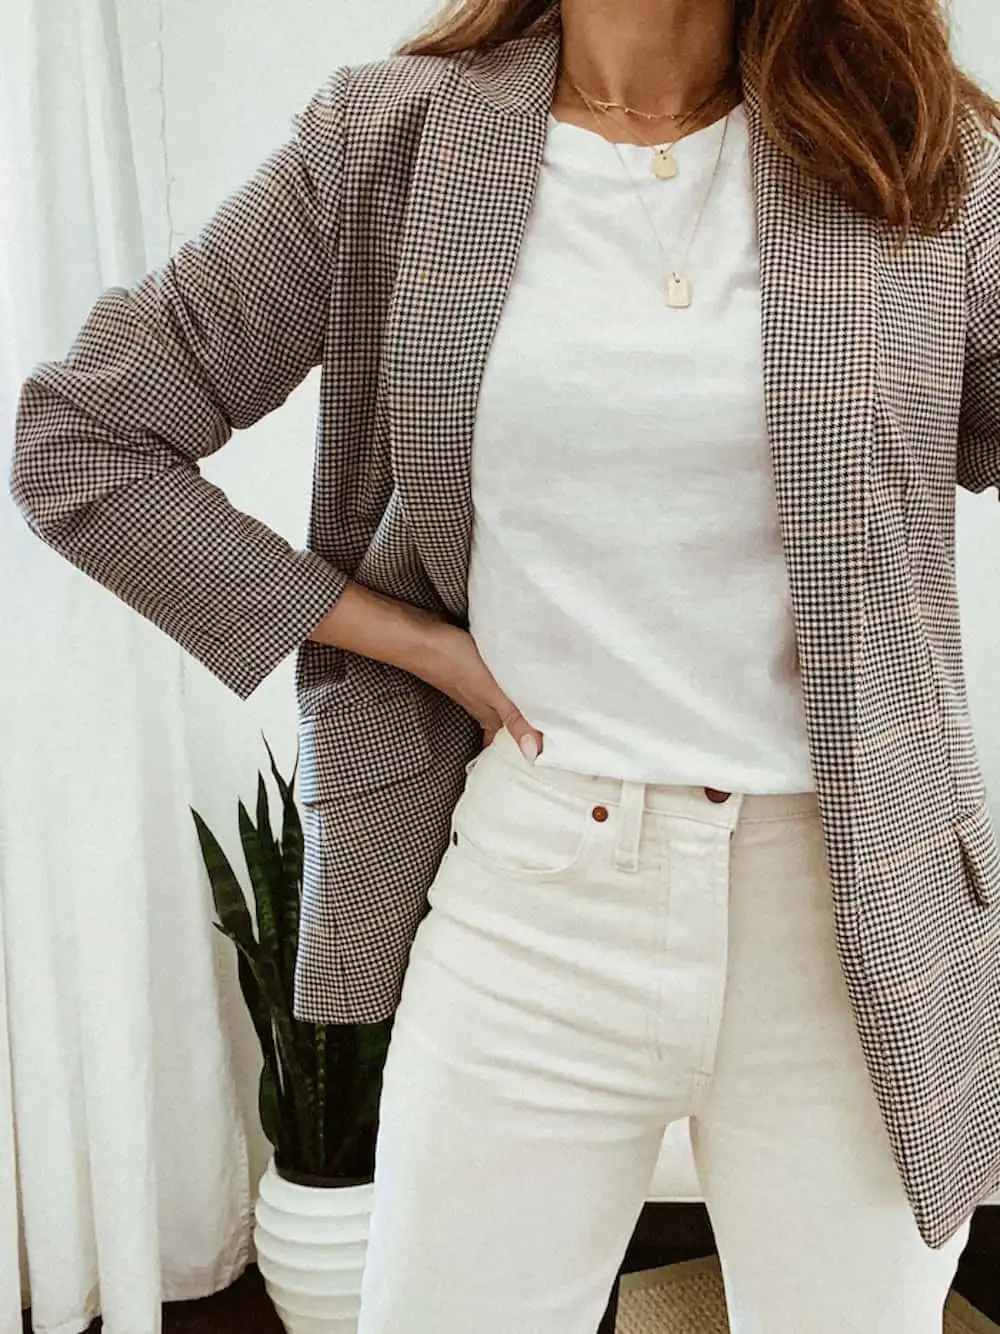 Blazer Outfits For Women: How to Mix and Match Like a Pro